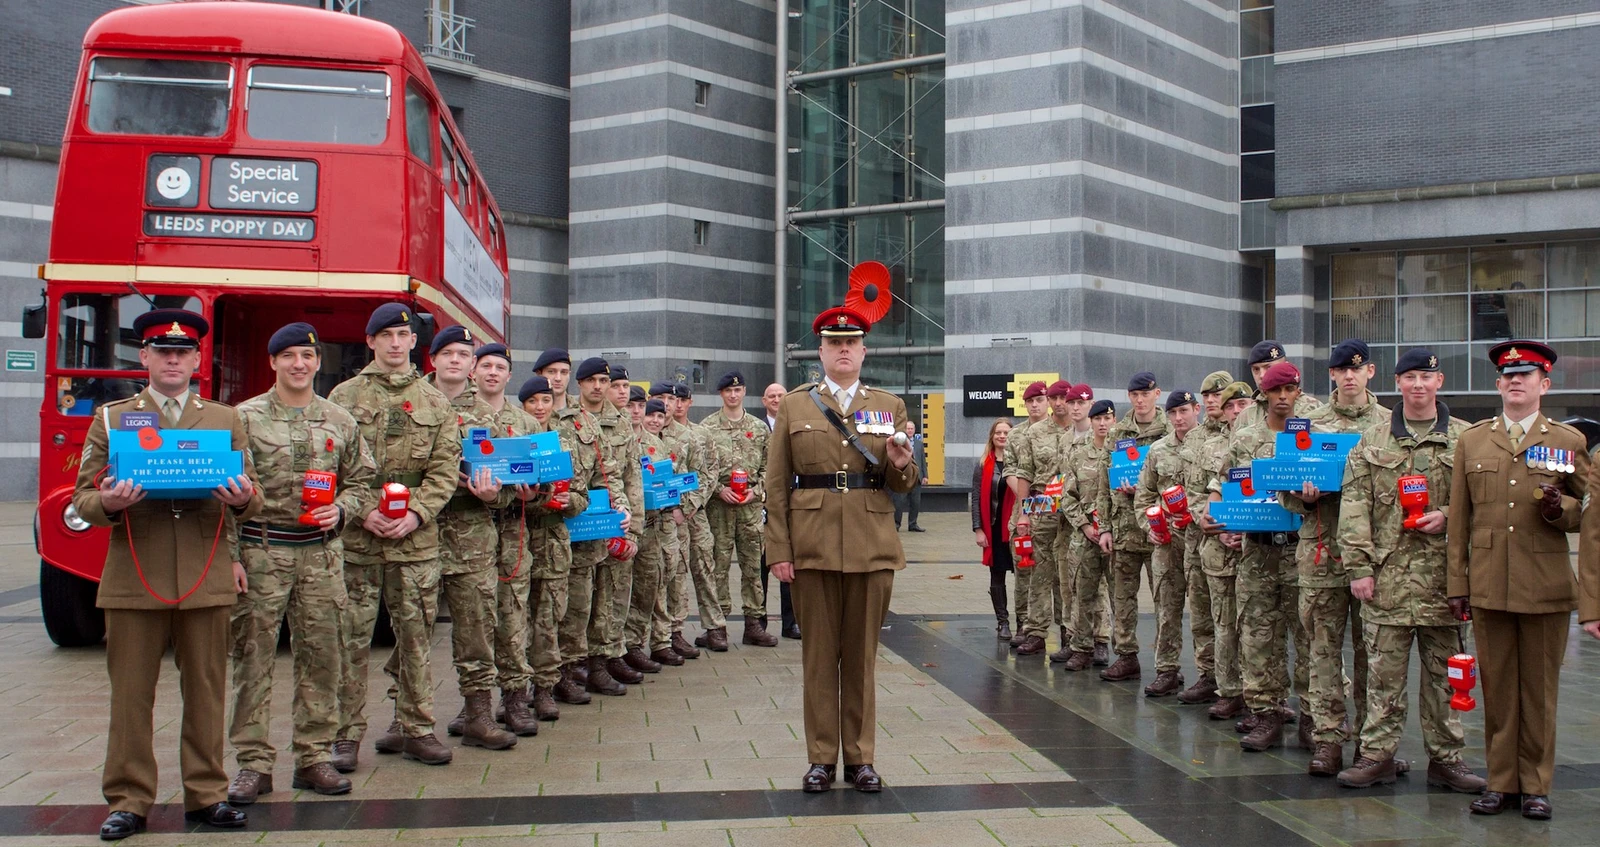 Leeds Poppy day collectors and bus